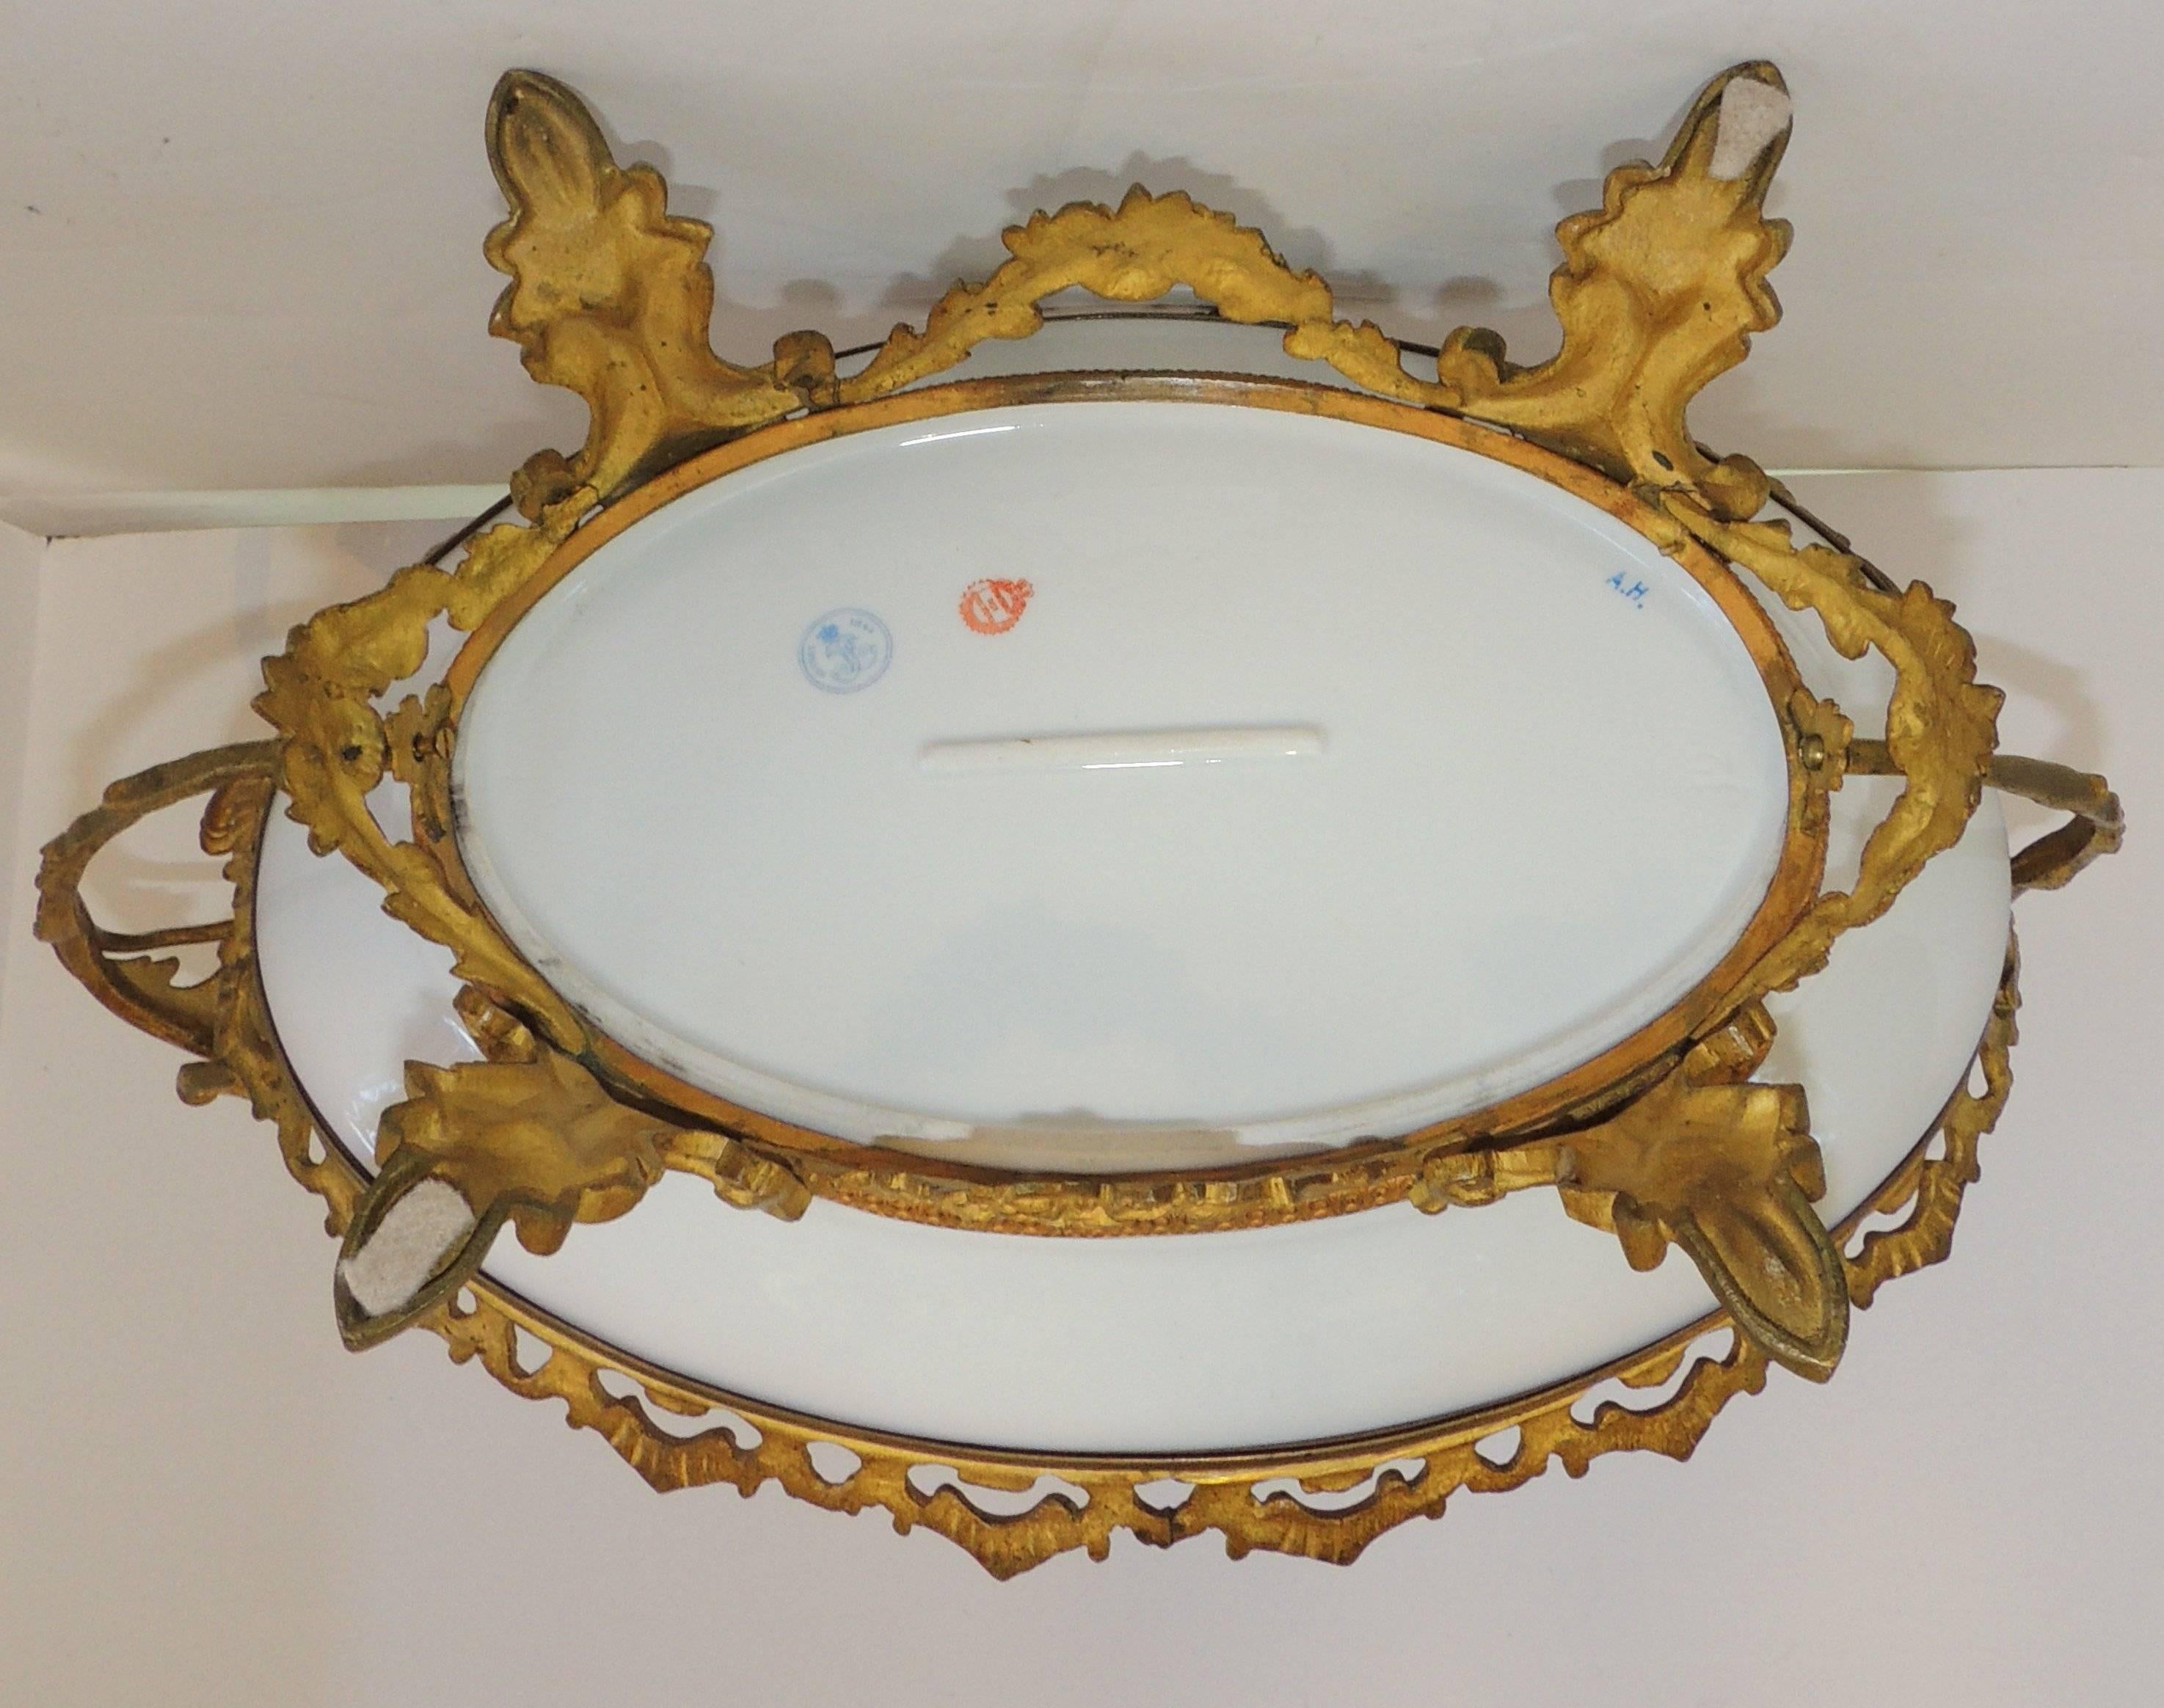 Wonderful French Ormolu Bronze Sevres Hand-Painted Porcelain Centerpiece Tray For Sale 3